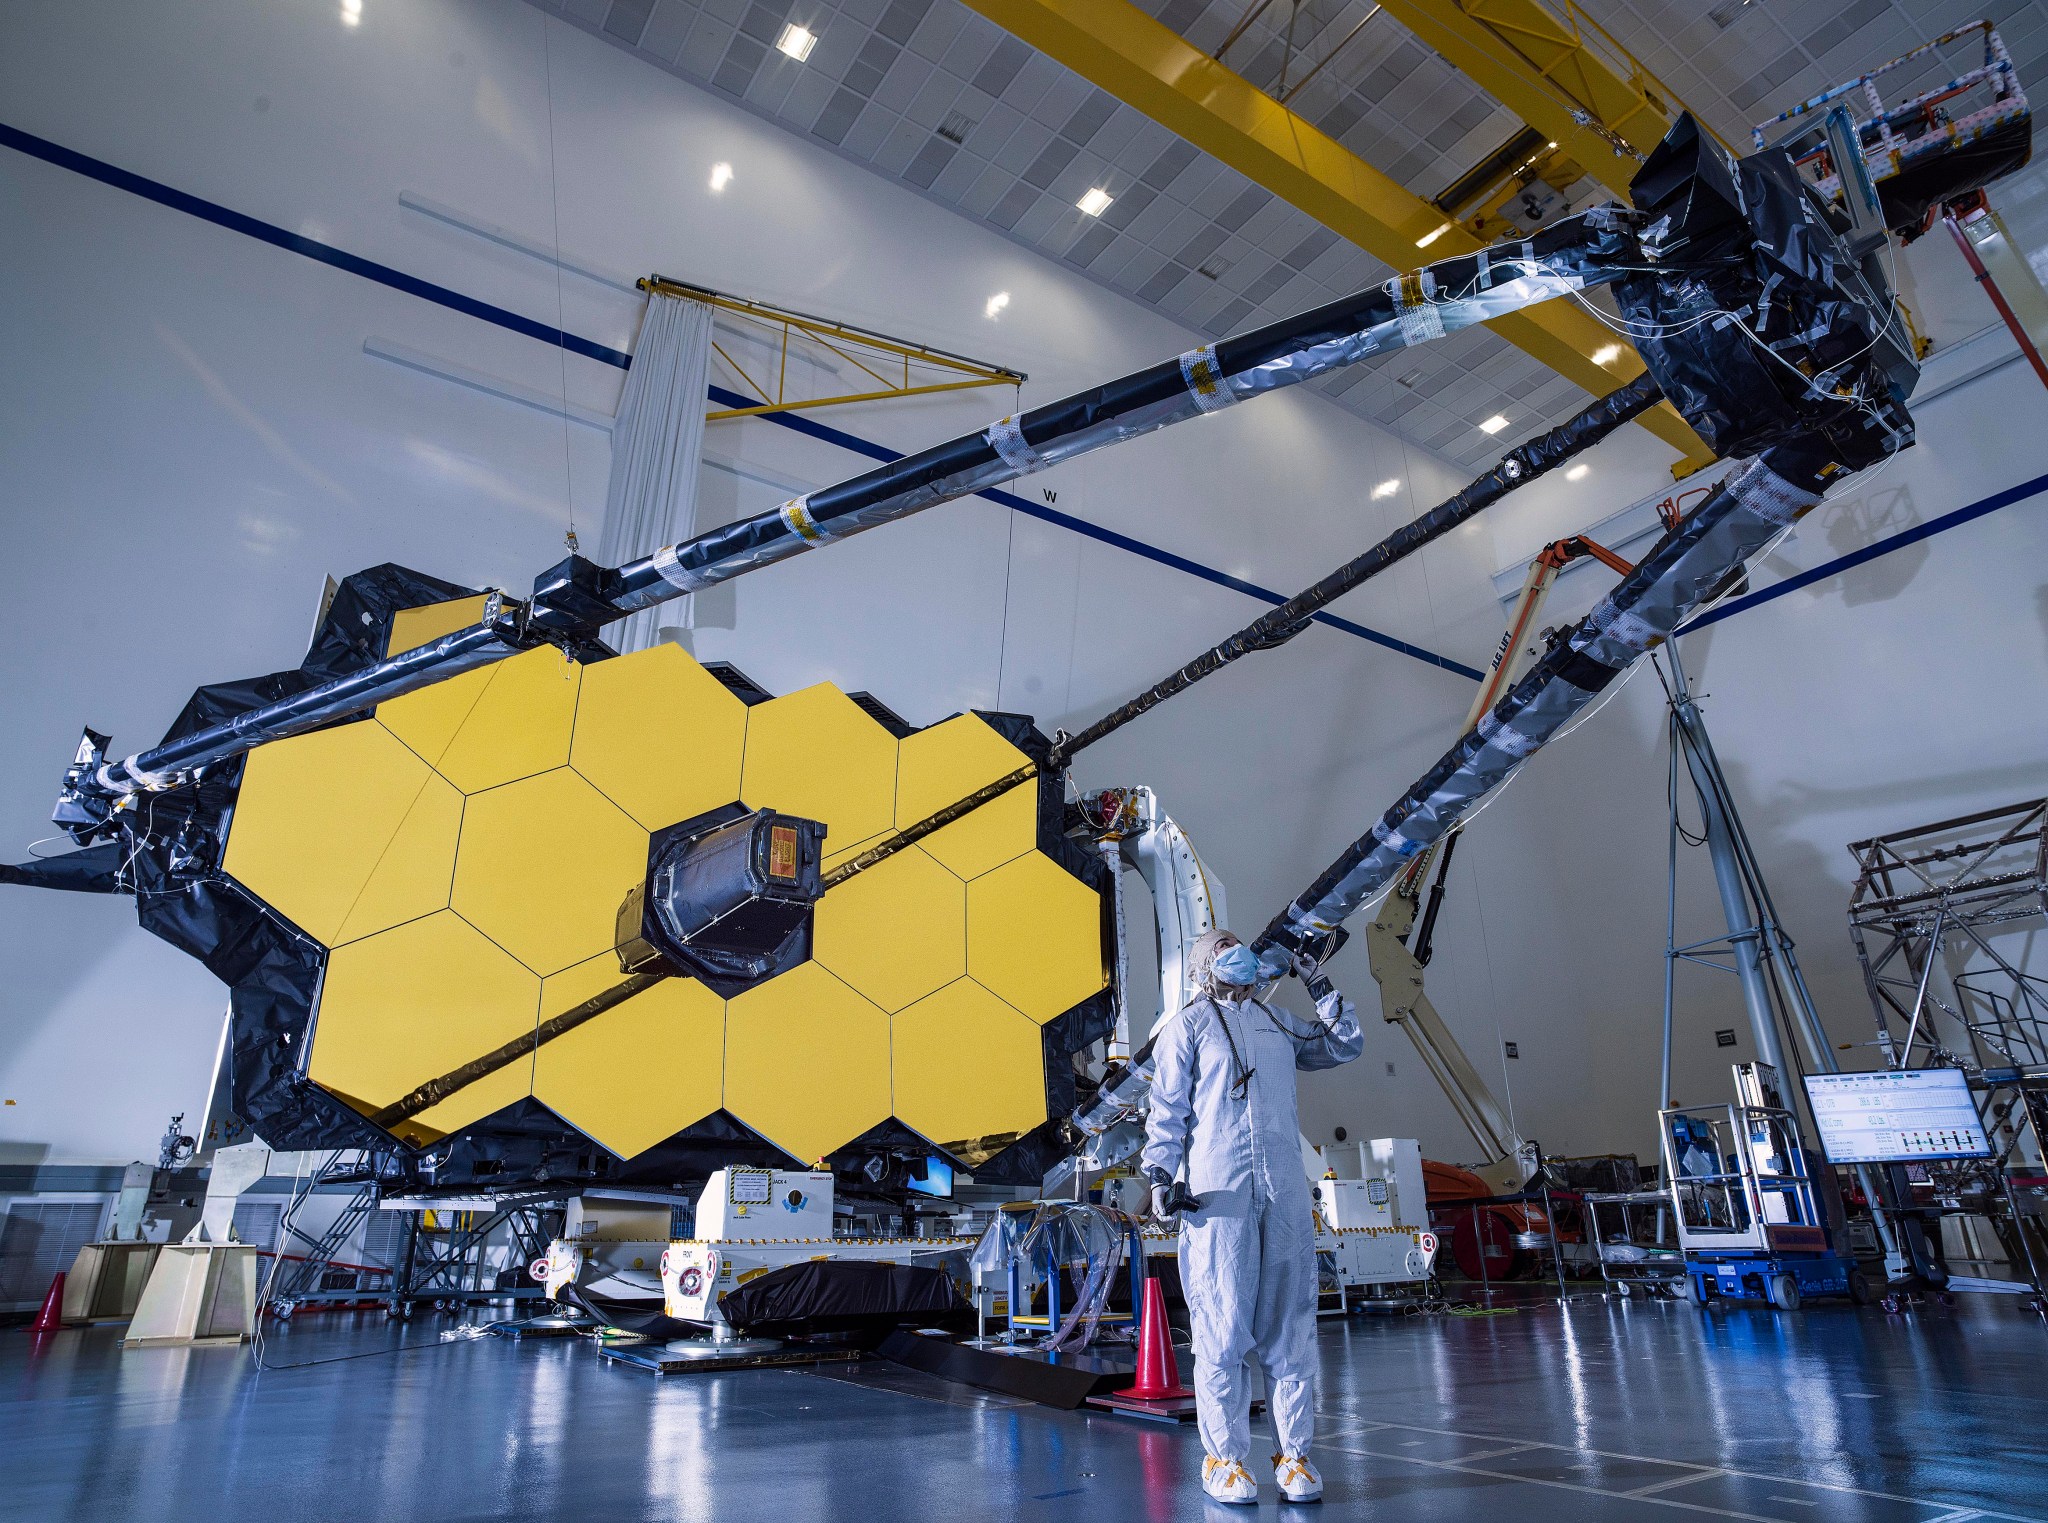 As one NASA Webb’s most important components, technicians and engineers thoroughly inspect the support structure.